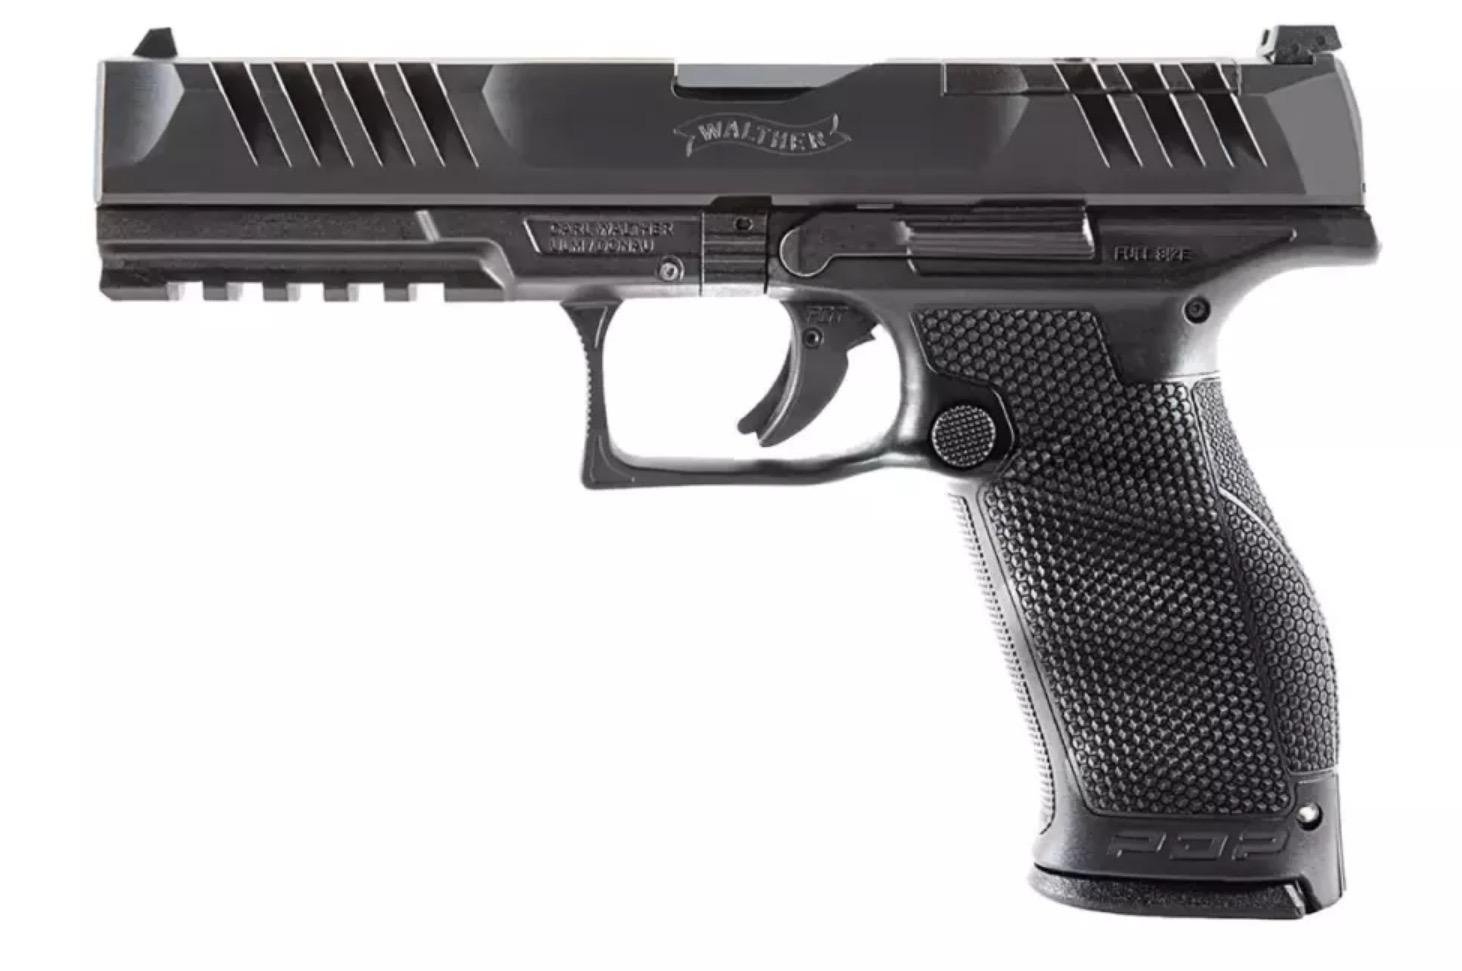 Walther Arms Inc PDP Full-size 9mm 4.5" Barrel 18 Rnd - $476.99 after code "WLS10" 